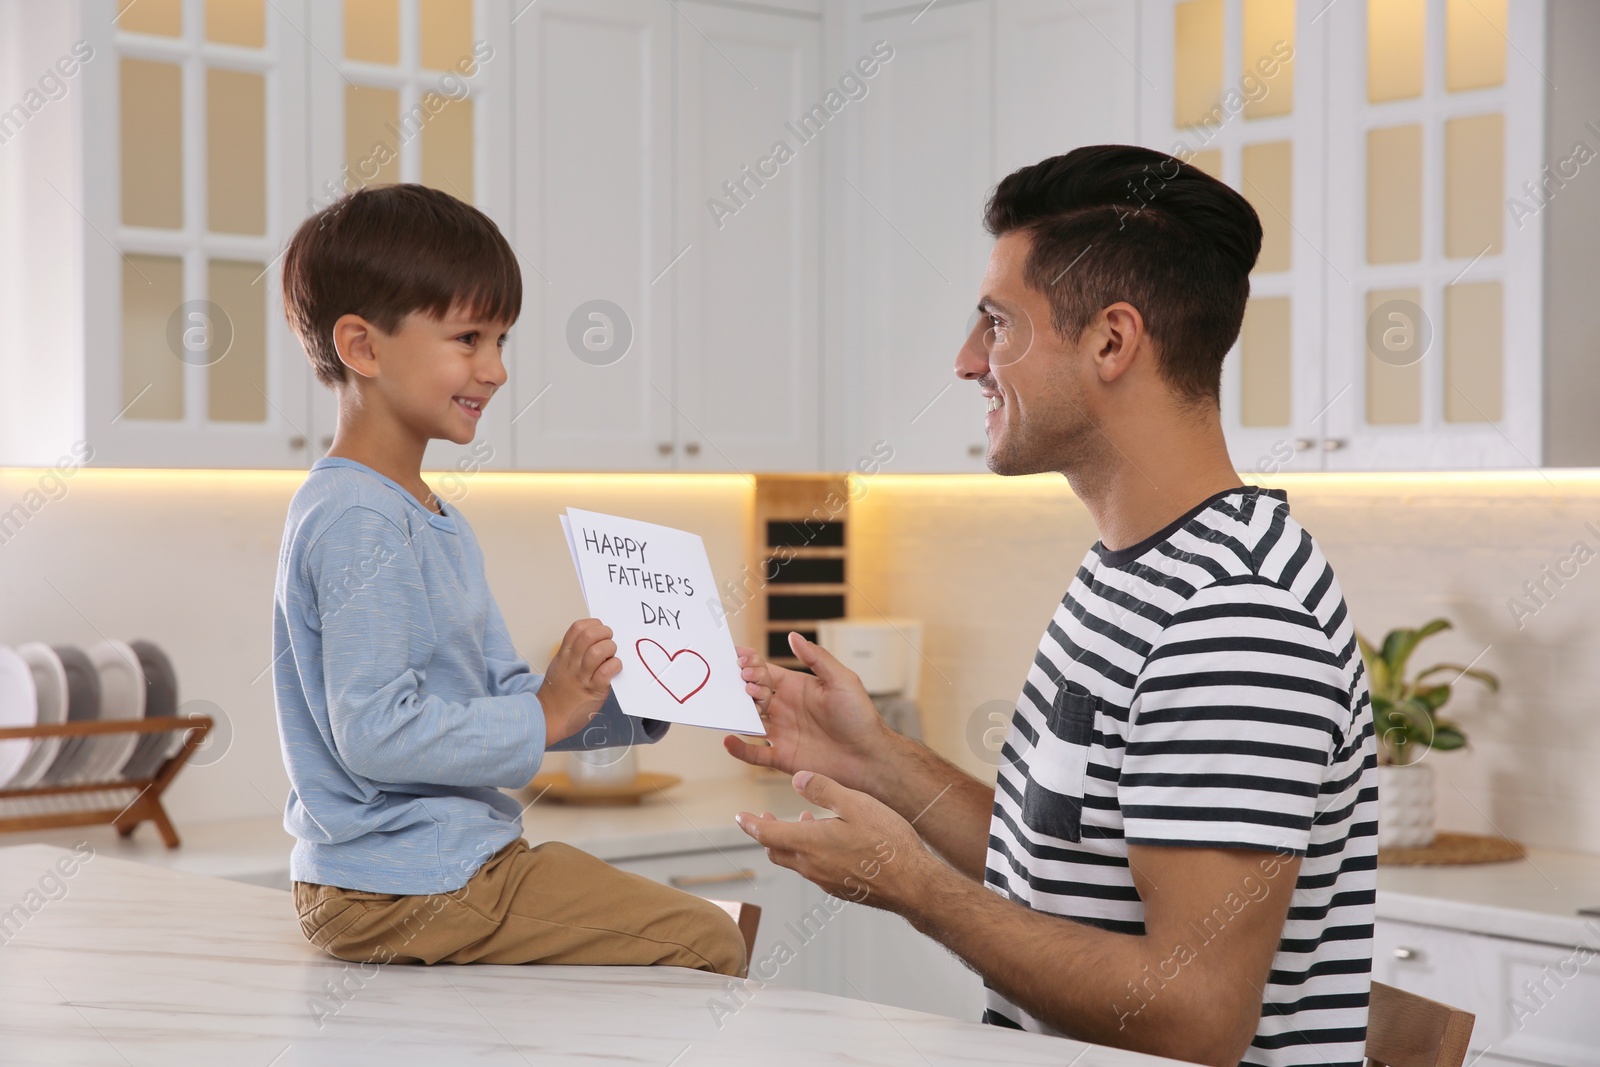 Photo of Little boy greeting his dad with Father's Day in kitchen